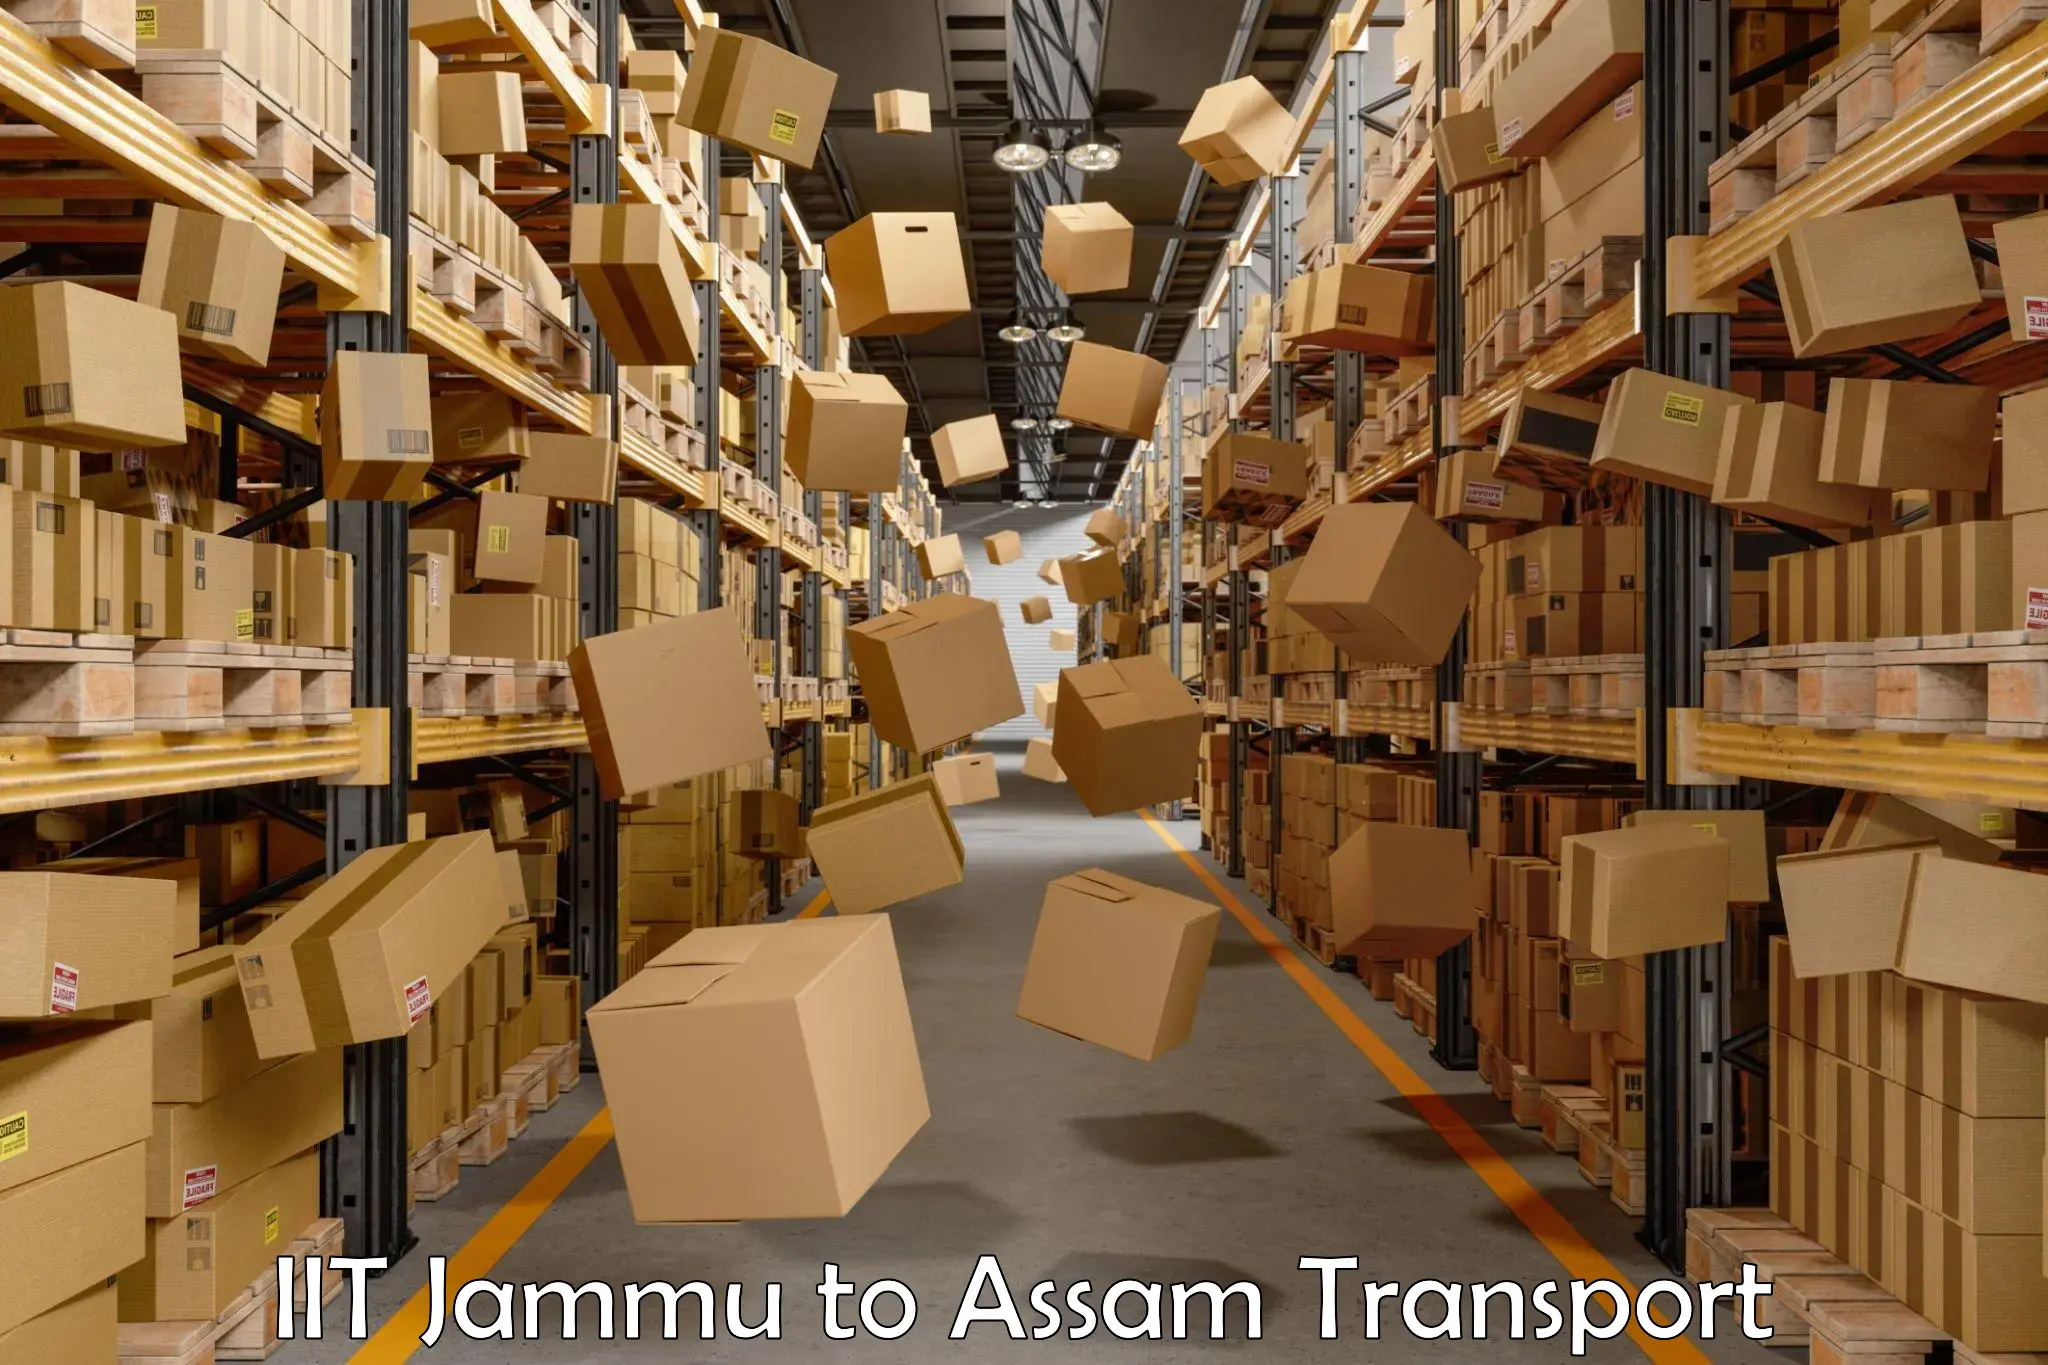 Transport bike from one state to another IIT Jammu to Assam